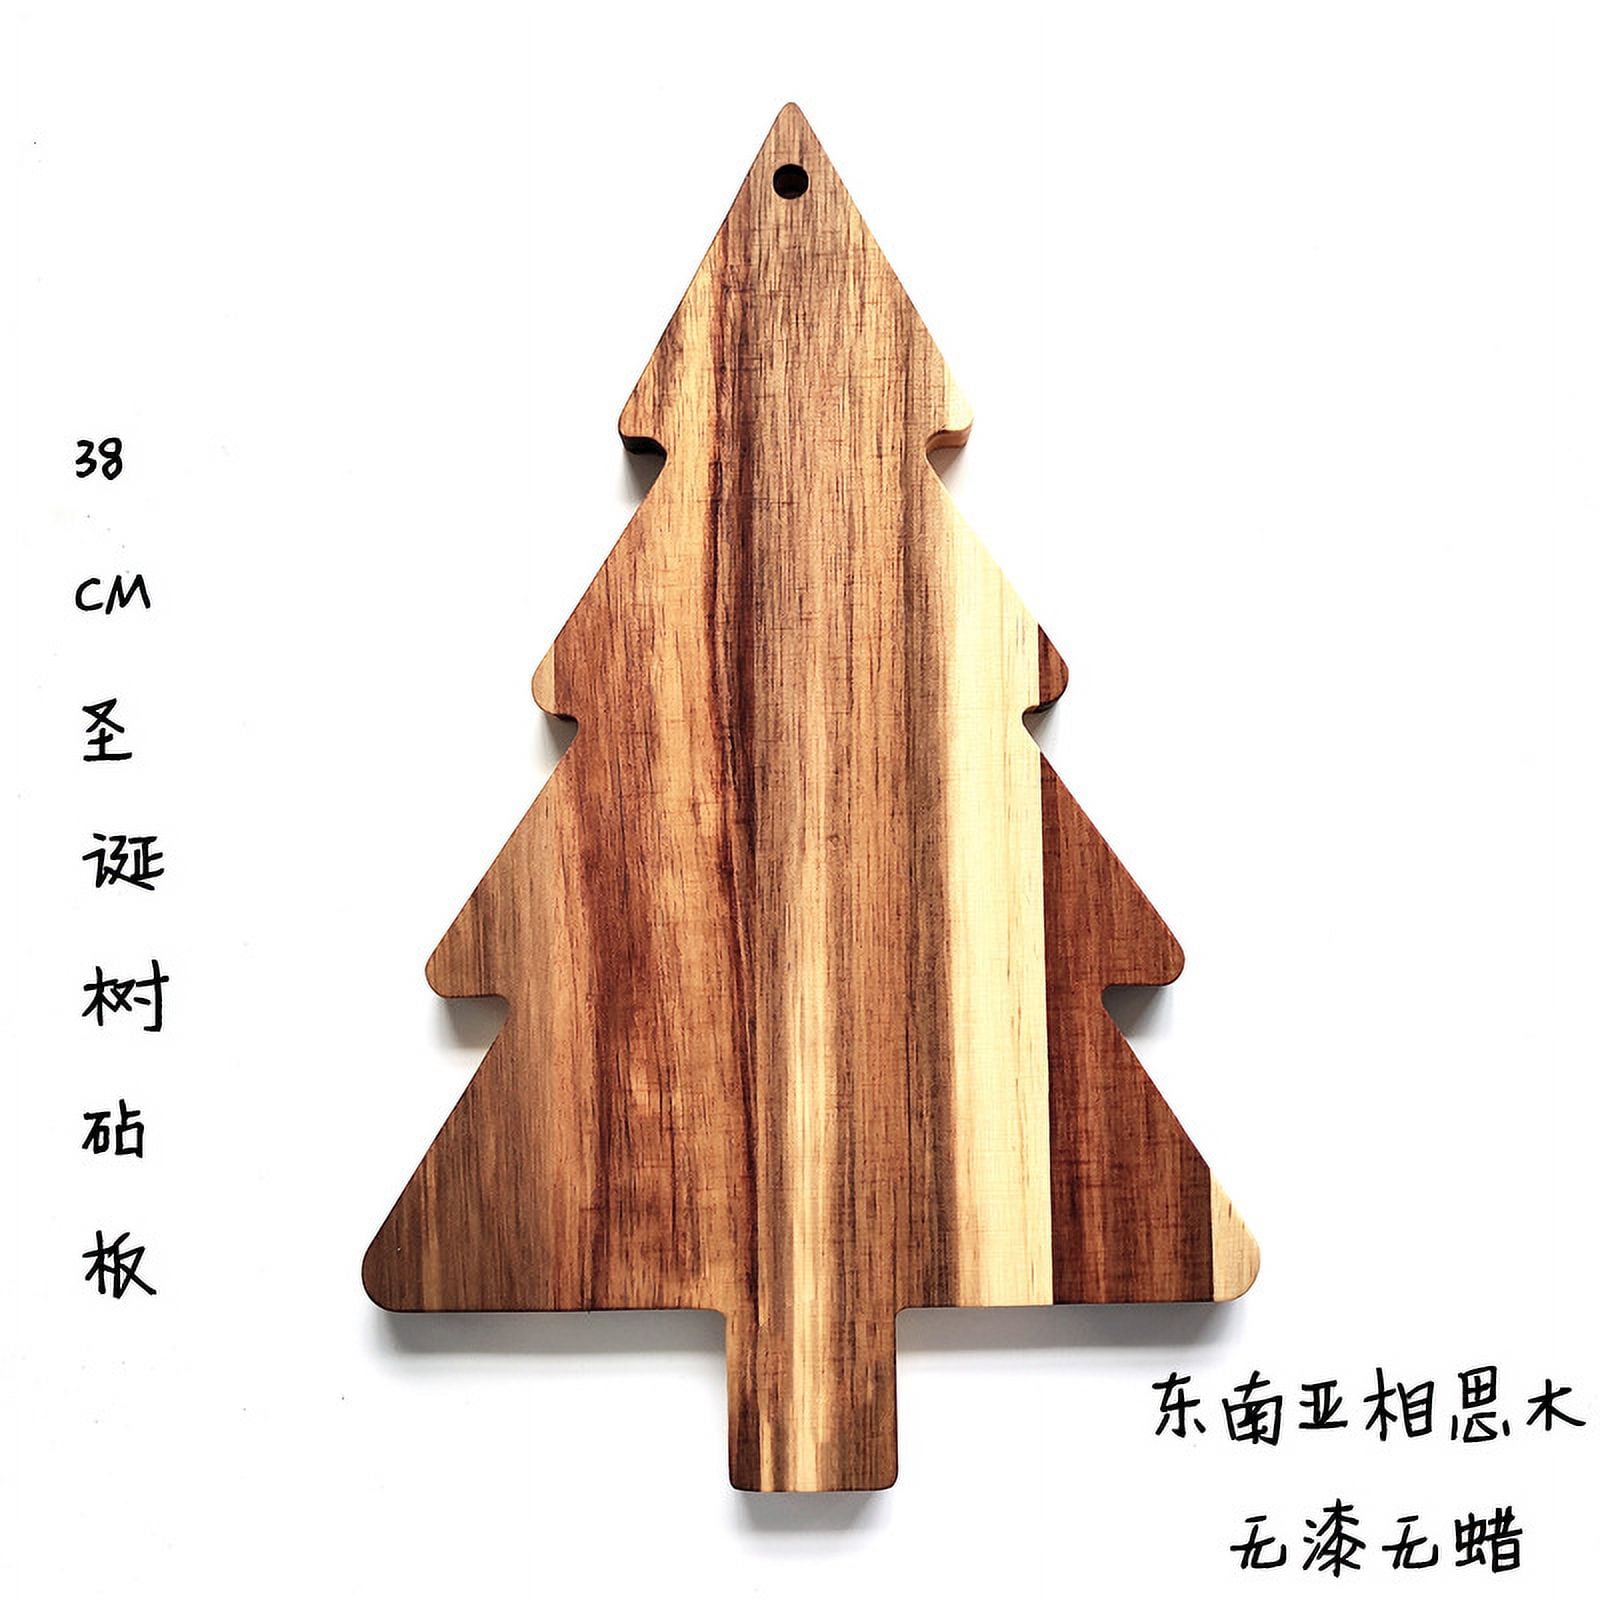 Kigley 6 Pcs Christmas Tree Cheese Board Cutting Chopping Board Wood  Serving Board Wooden Tree Shaped Charcuterie Board with Matching Knife for